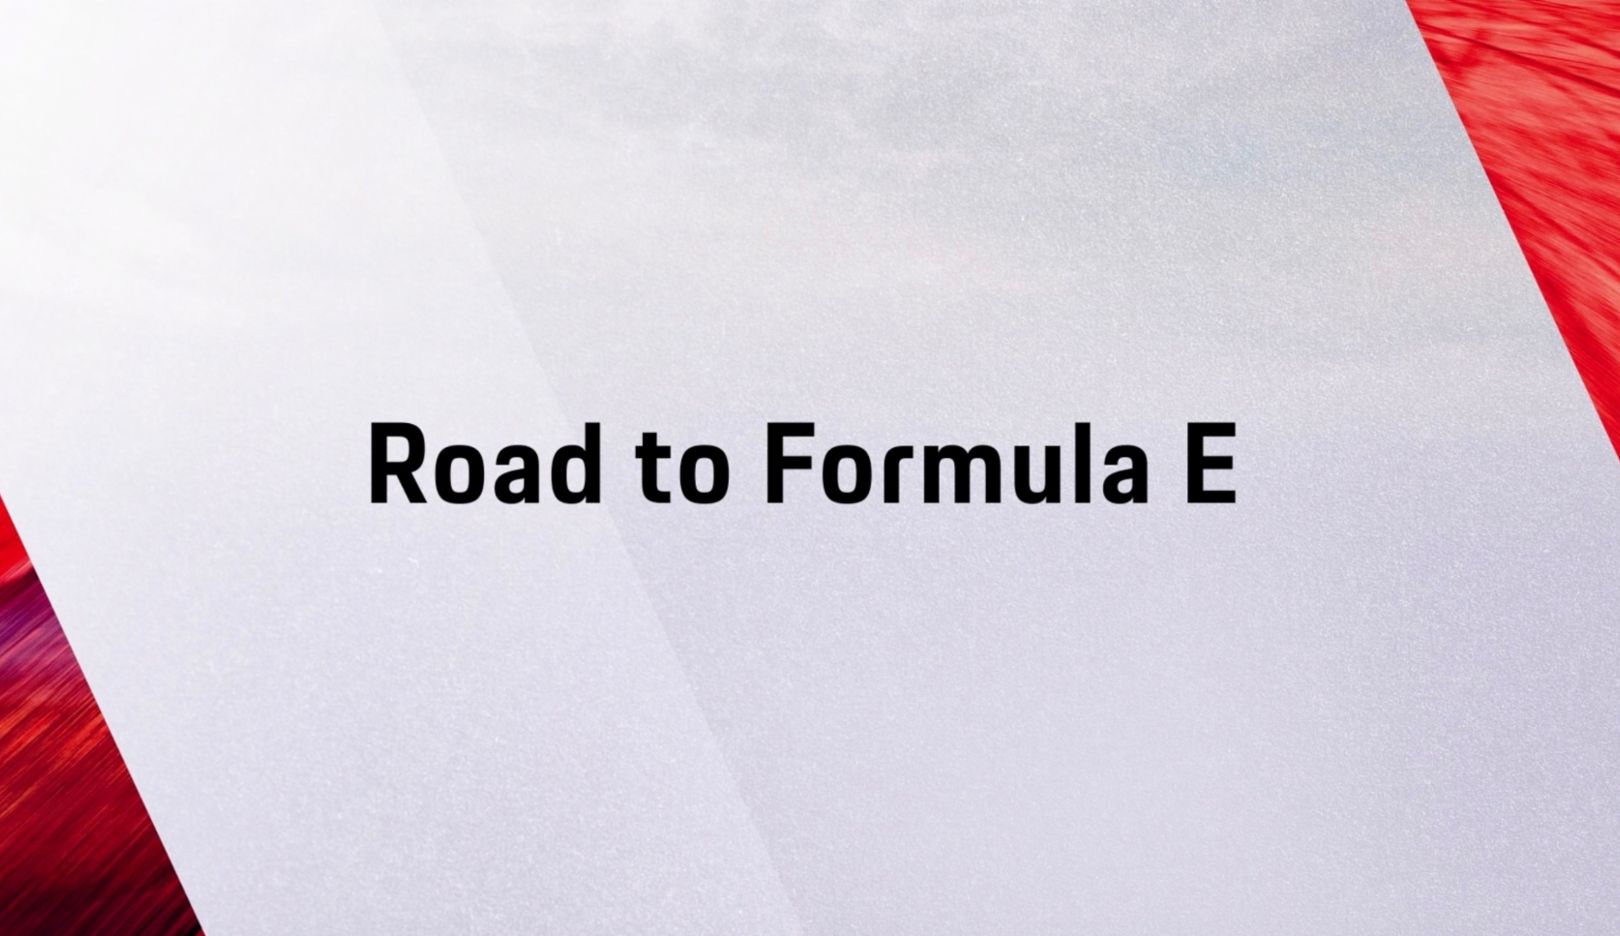 The Road to Formula E as an animation